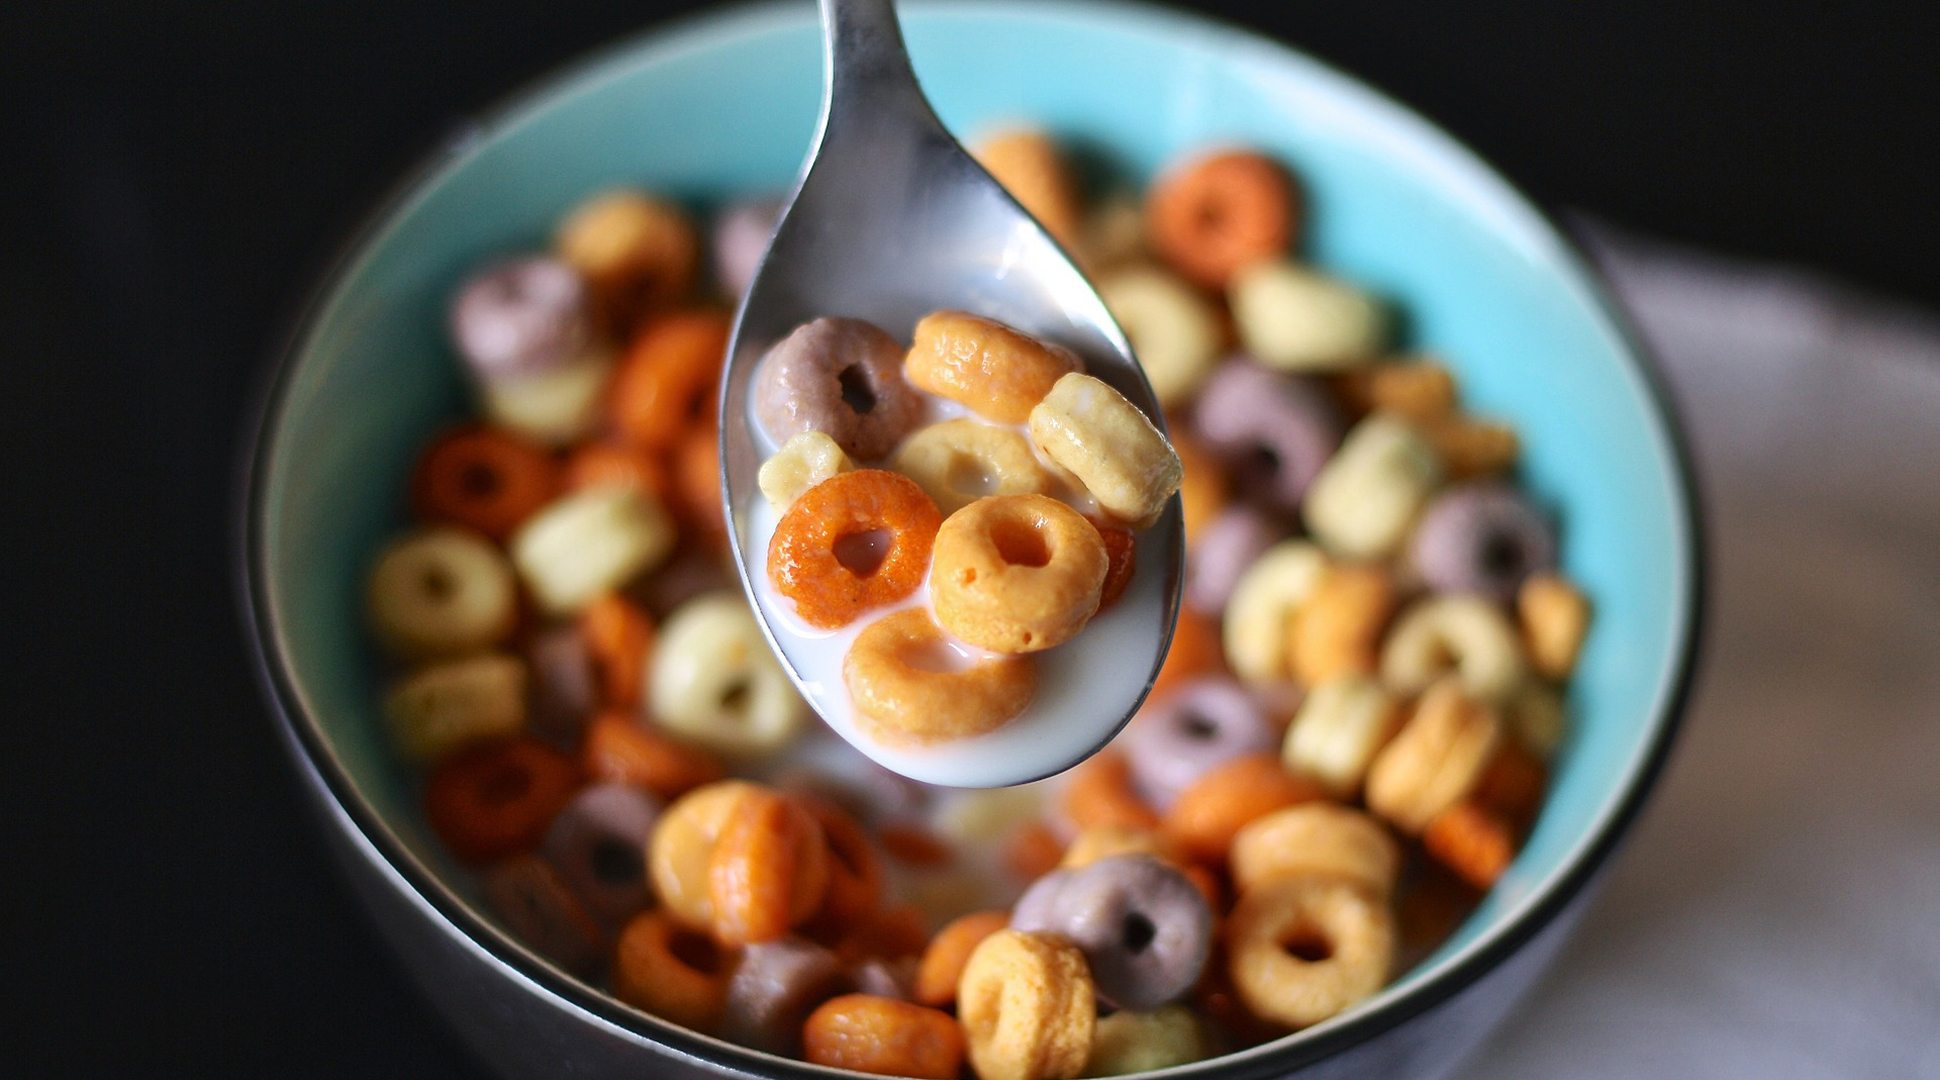 National Cereal Day deserves a replay!